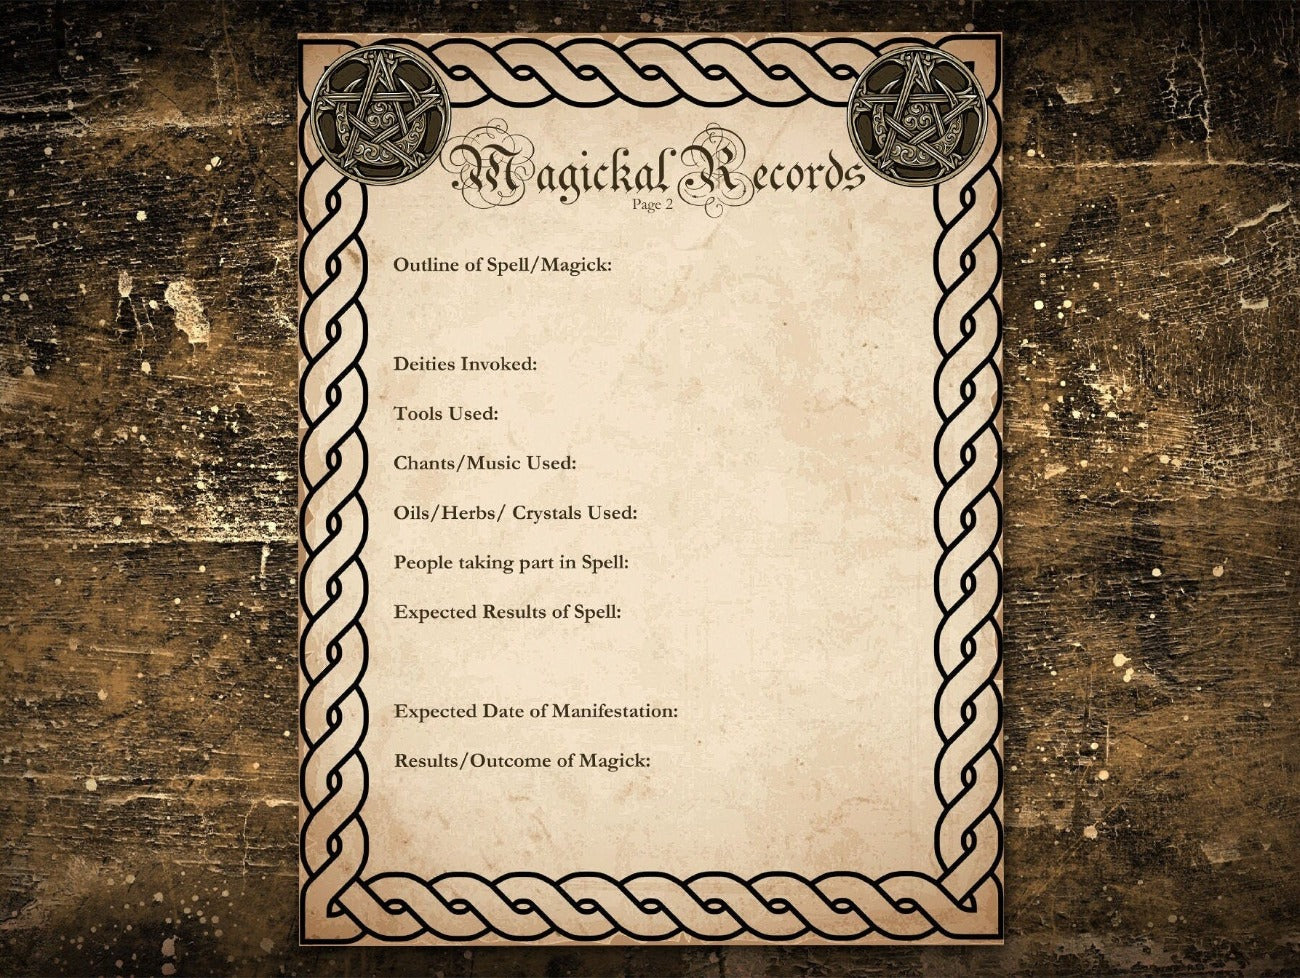 MAGICKAL RECORD PAGE outline of spell, deities invoked, tools used, chants used, oils, herbs, crystals, people taking part in the spell, expected results of the spell, expected date of manifestation, outcome of magick - Morgana Magick Spell